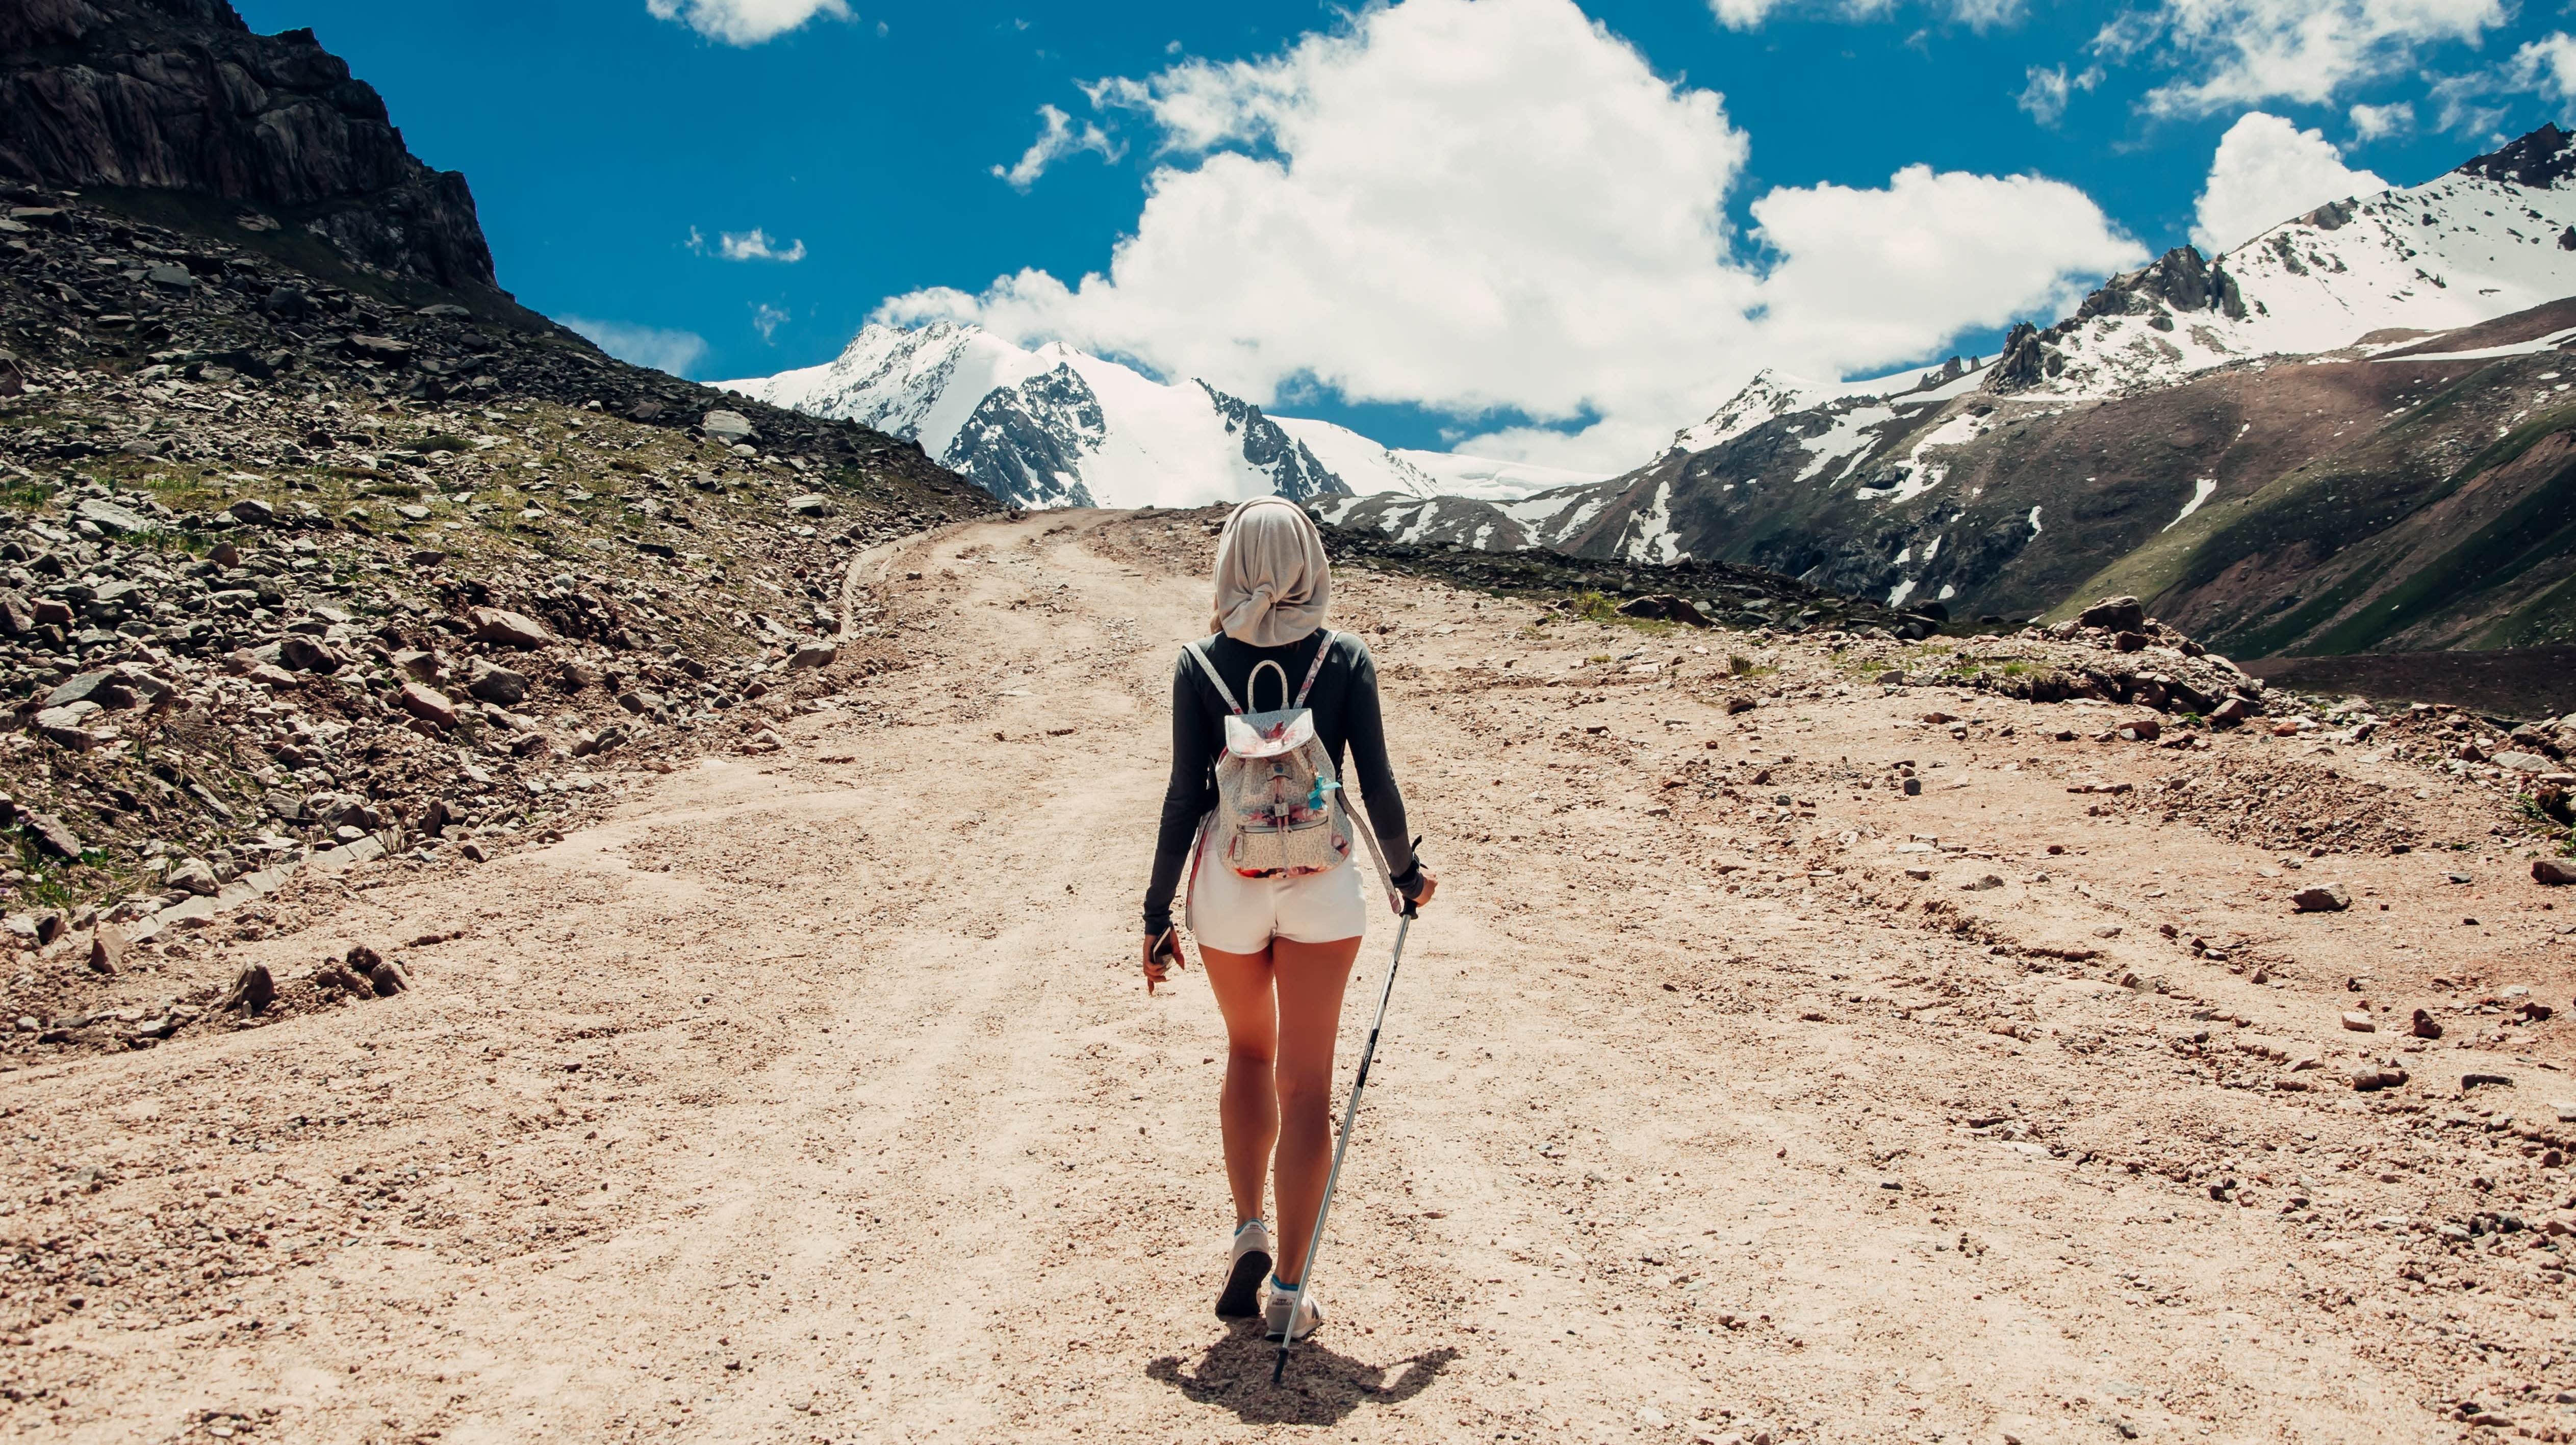 Find The Best Spots For A Hike Or Run Near You With This App